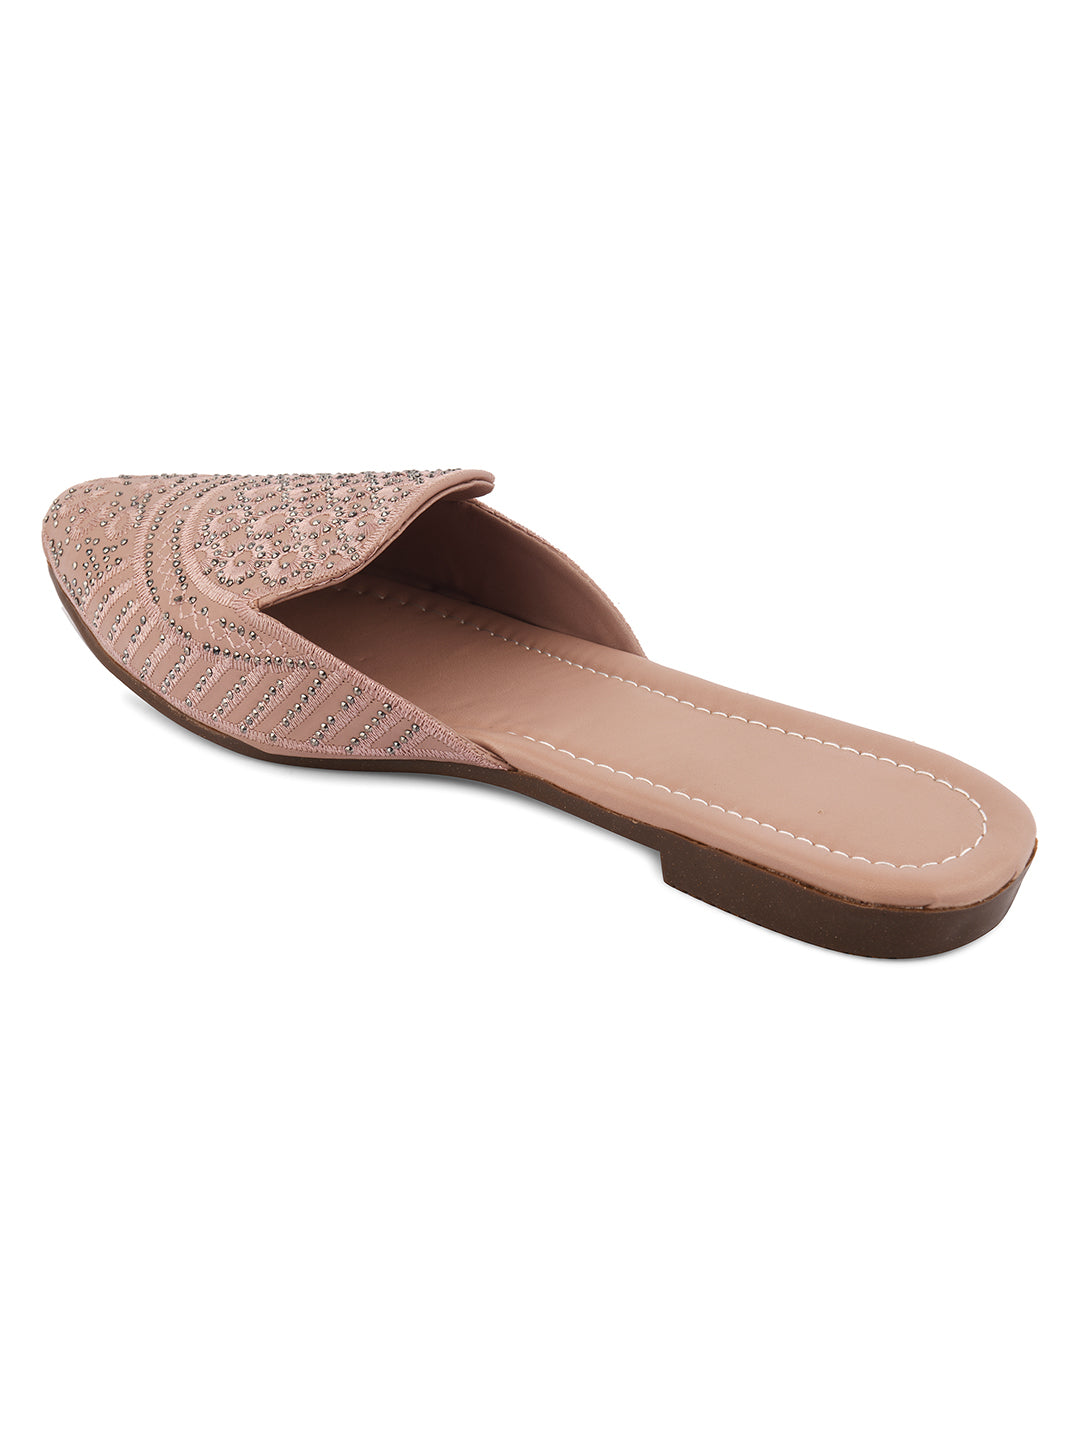 DESI COLOUR Women Peach-Coloured Embellished Leather Ethnic Mules Flats